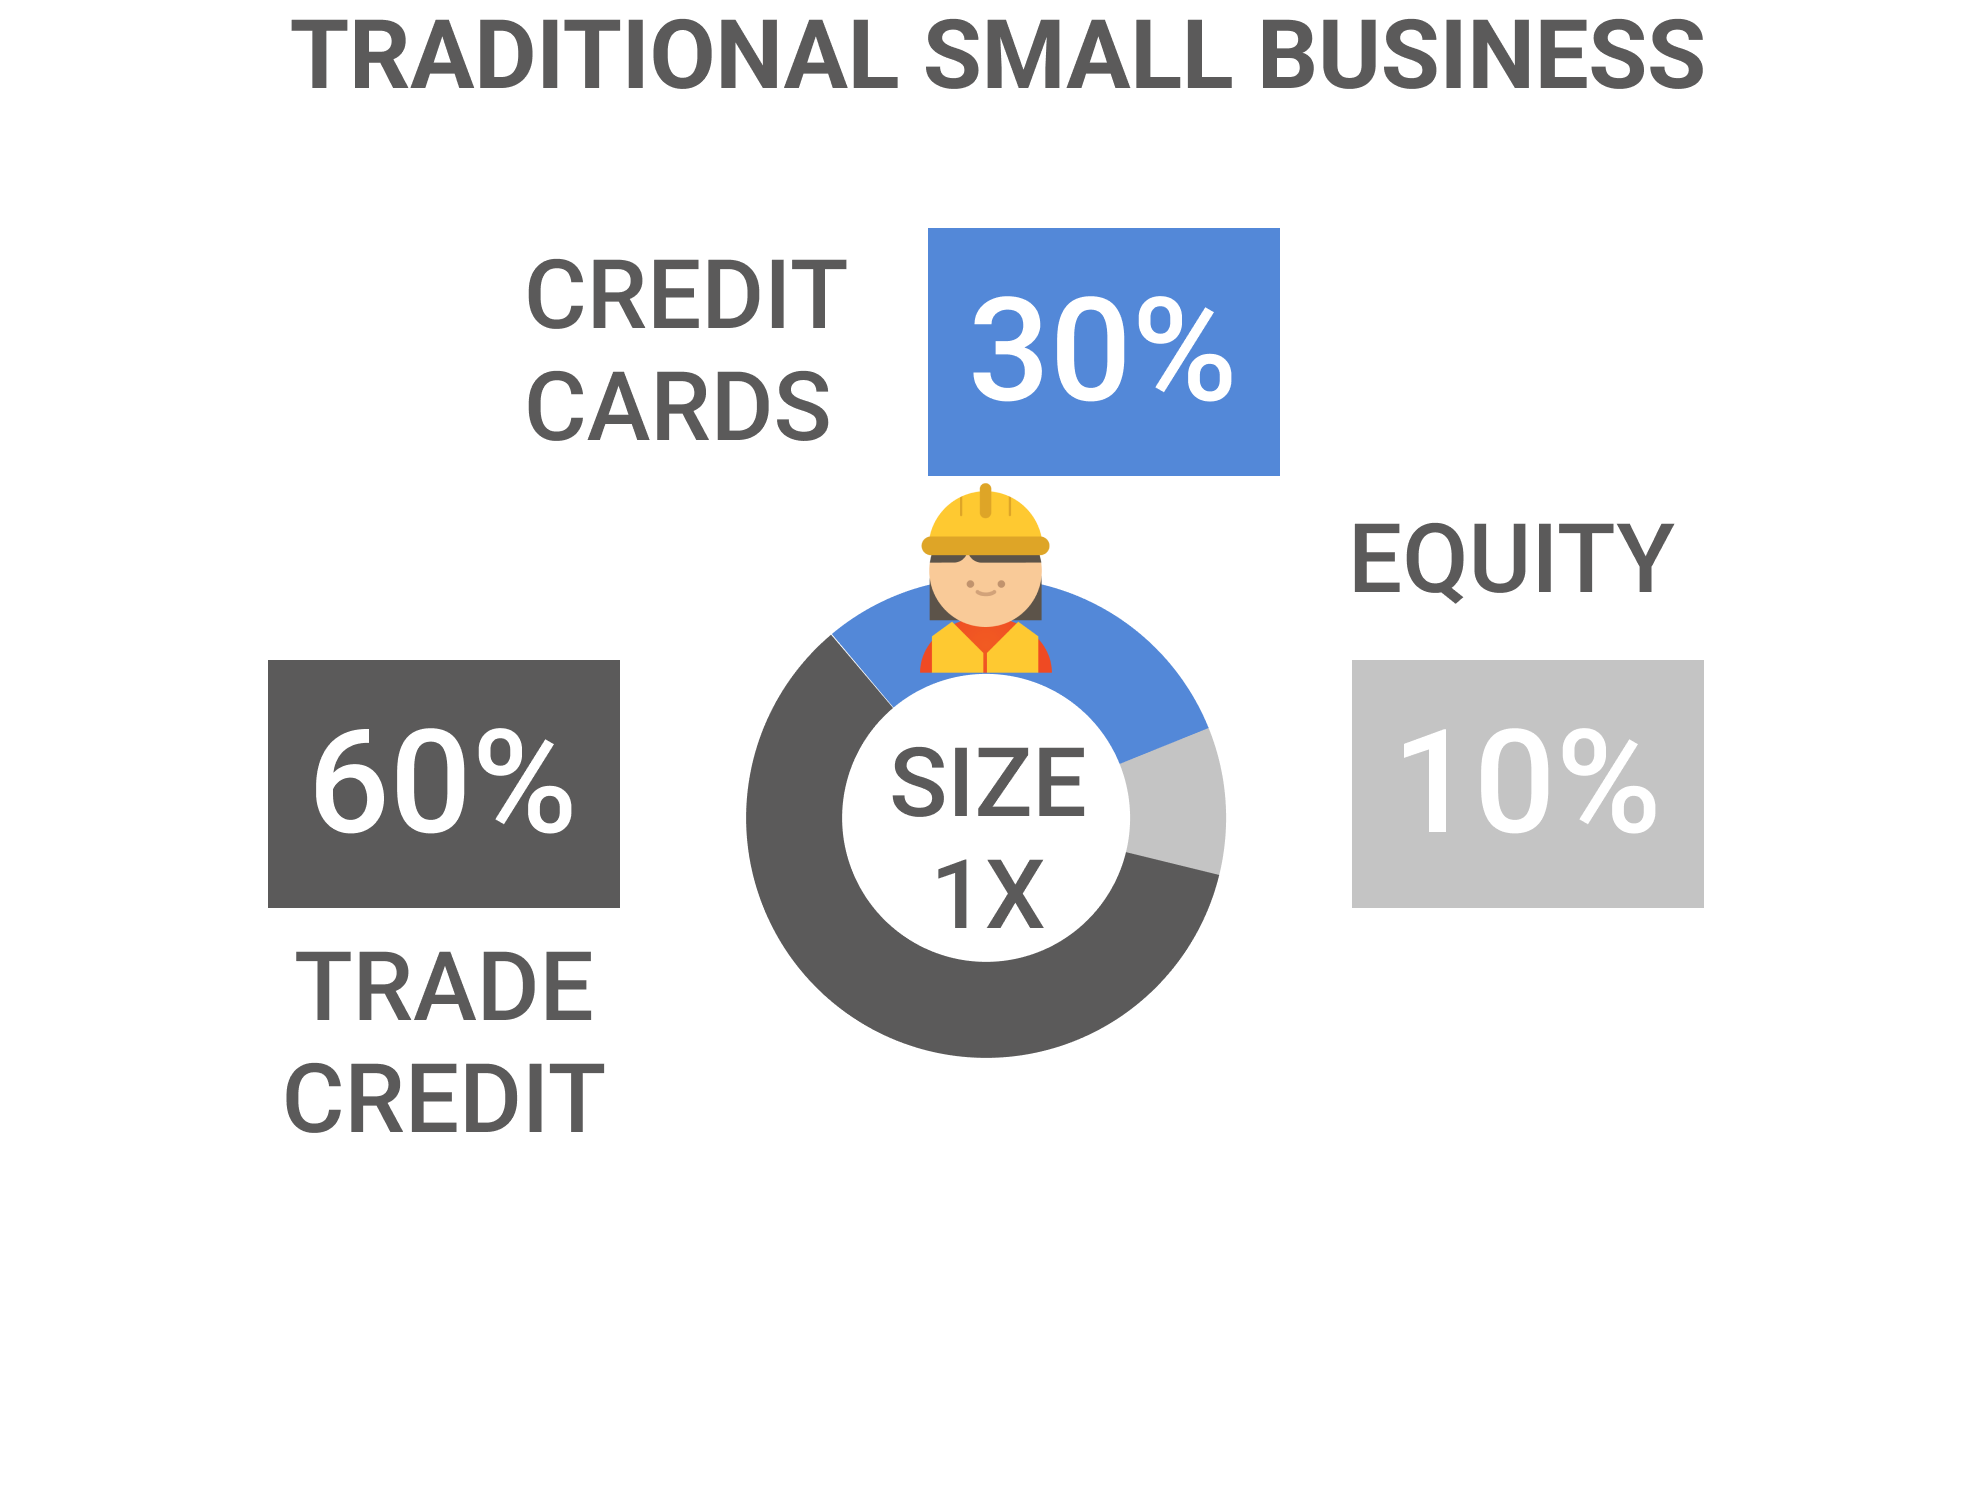 Capitalization of Traditional Small Business is dependent upon credit cards and trade credit both of which are expensive and limits company size and growth